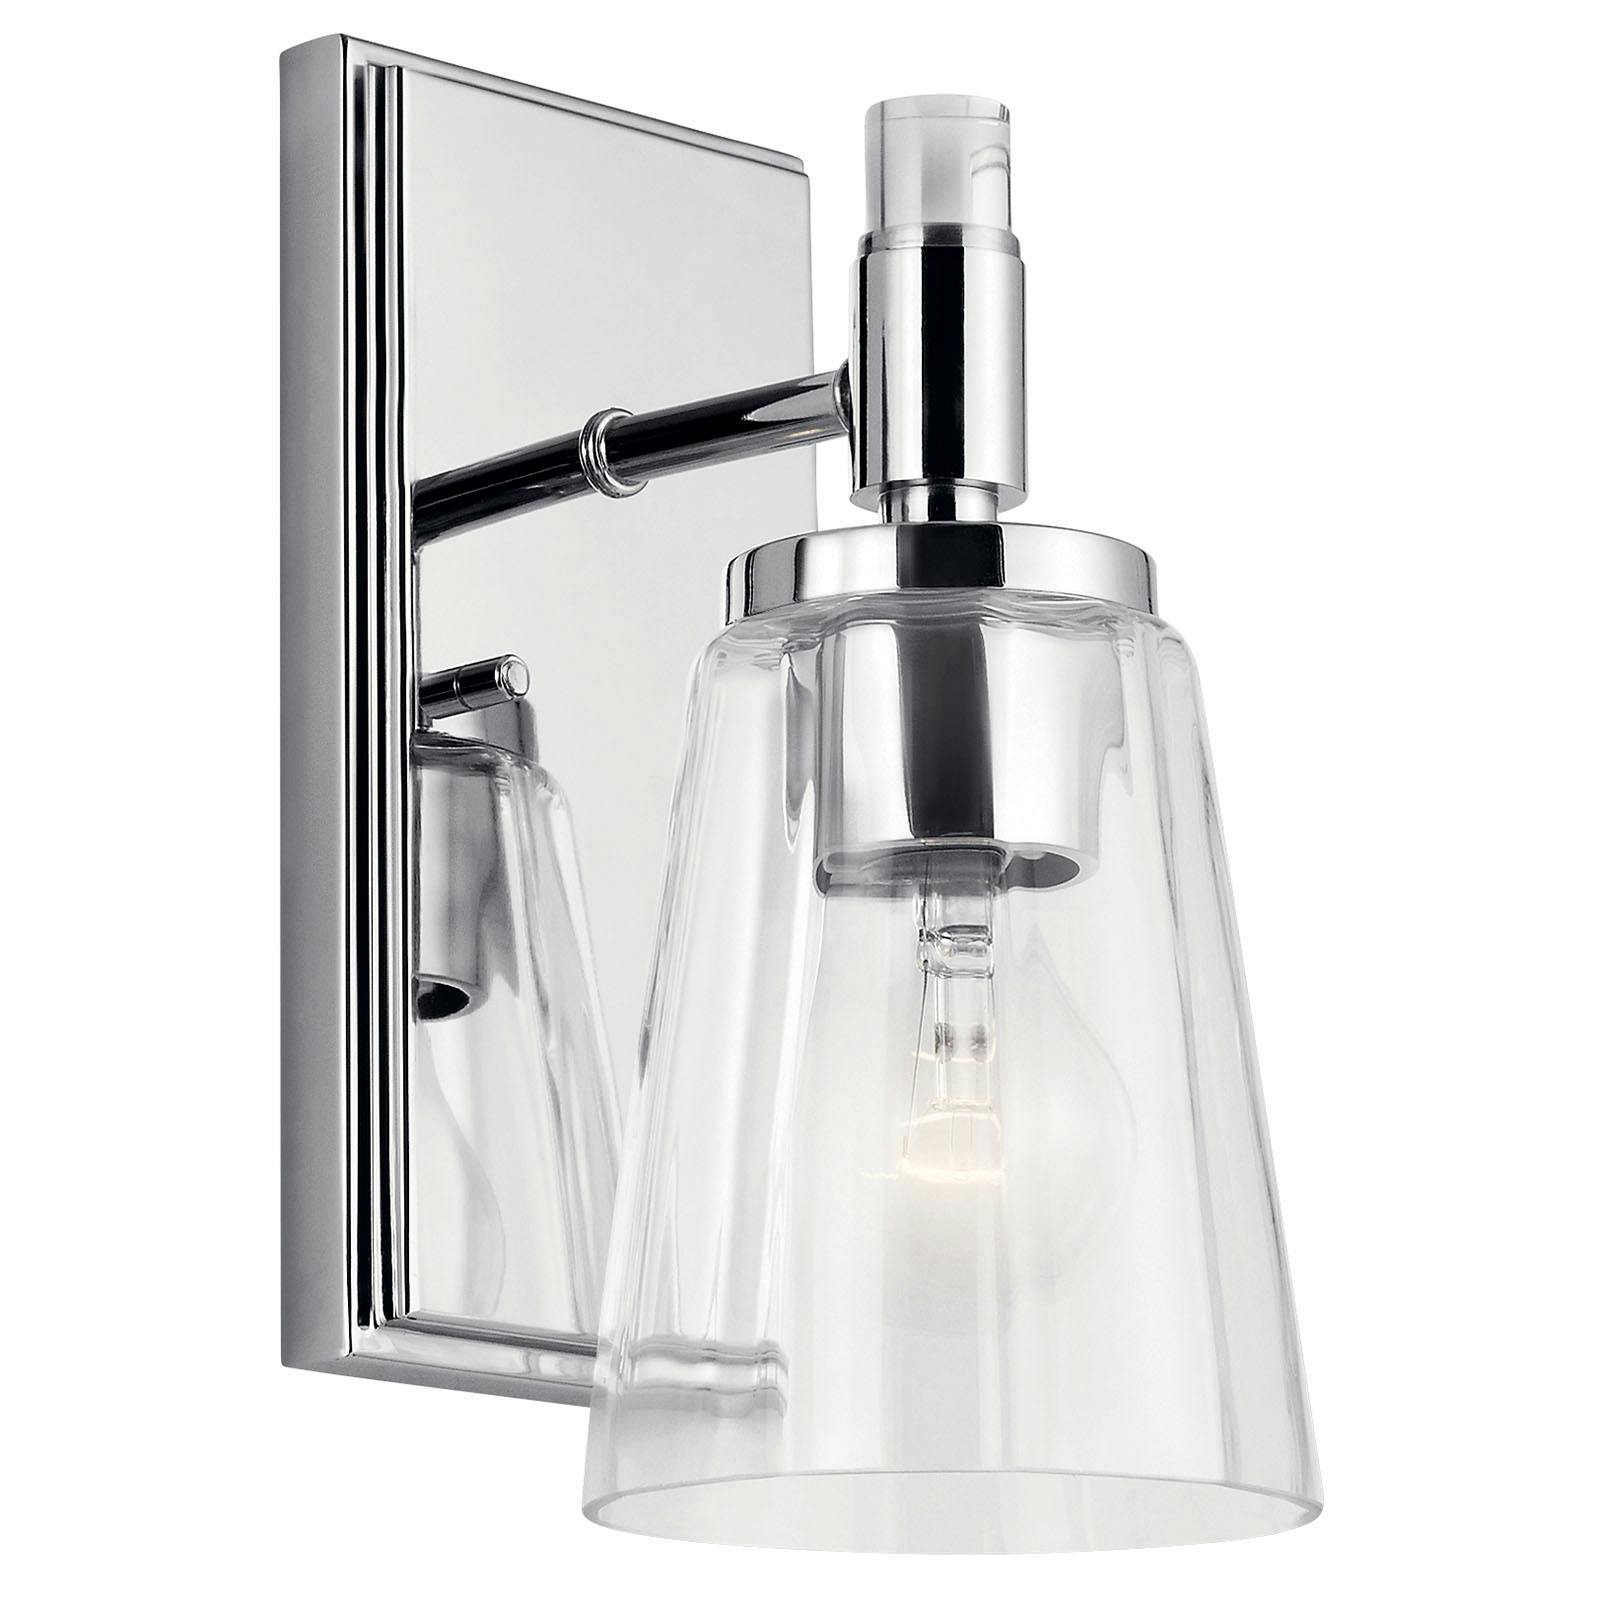 The Audrea™ 1 Light Wall Sconce Chrome facing down on a white background